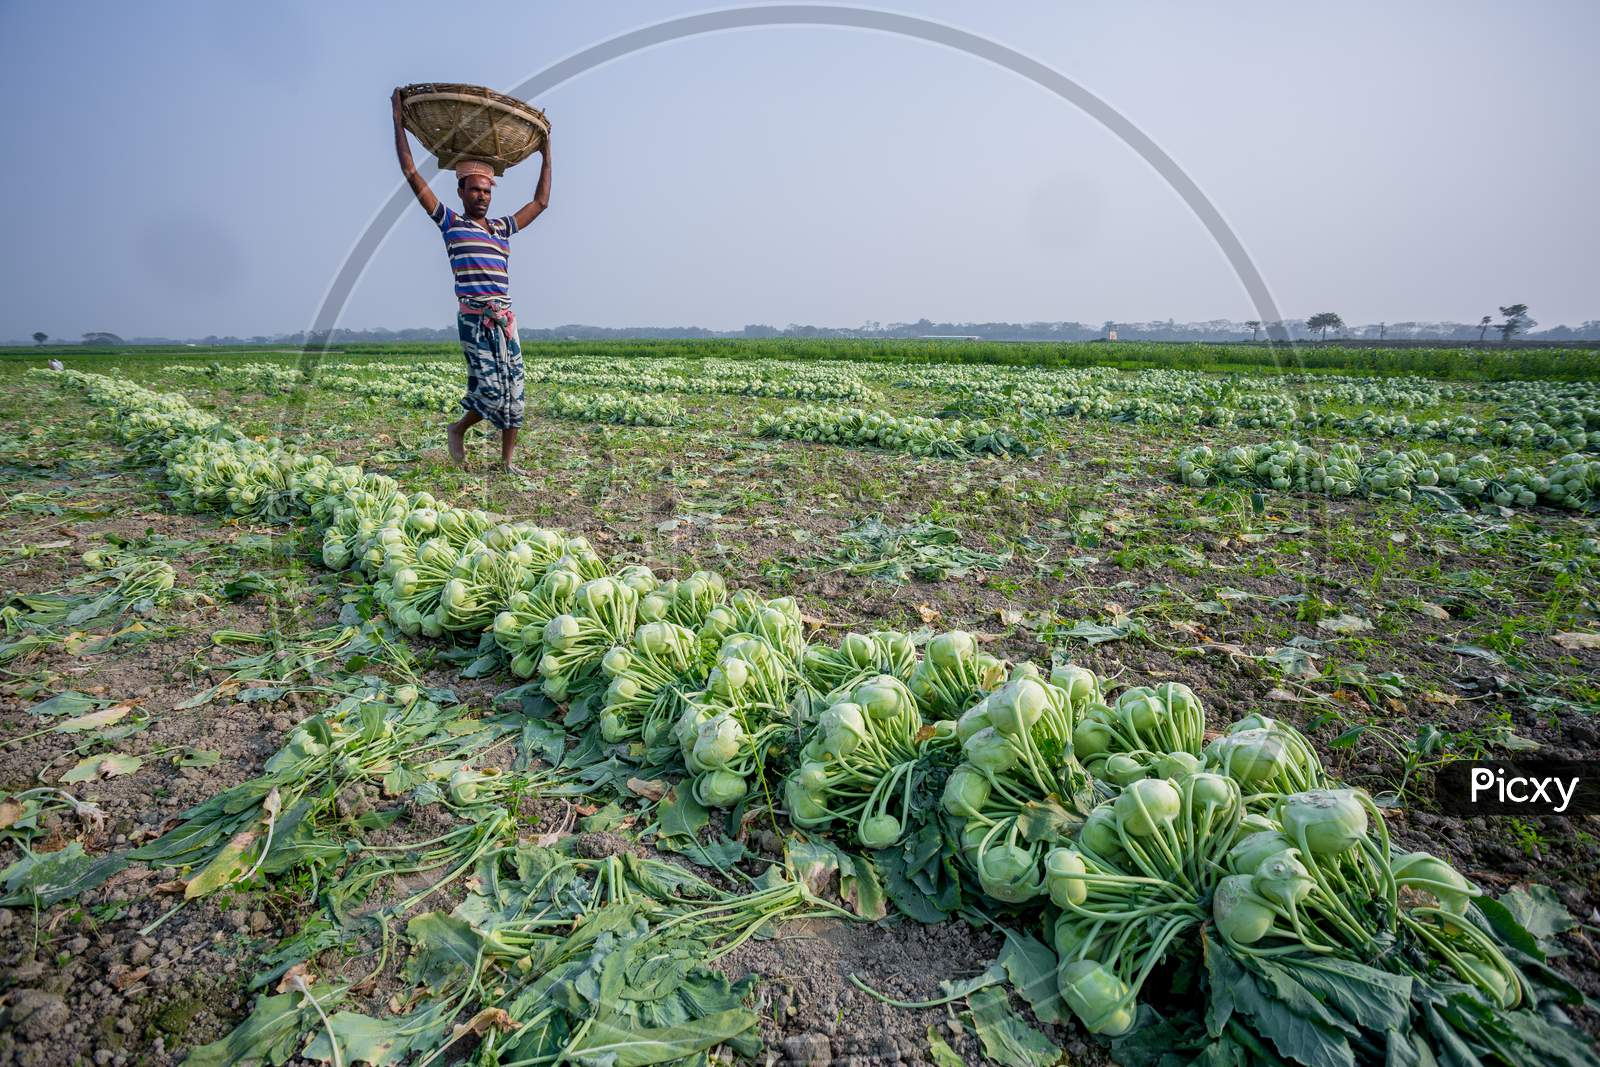 Bangladesh – January 24, 2020: A Worker Is Carrying Kohlrabi Cabbage In His Head For Exporting In Local Market At Savar, Dhaka, Bangladesh.